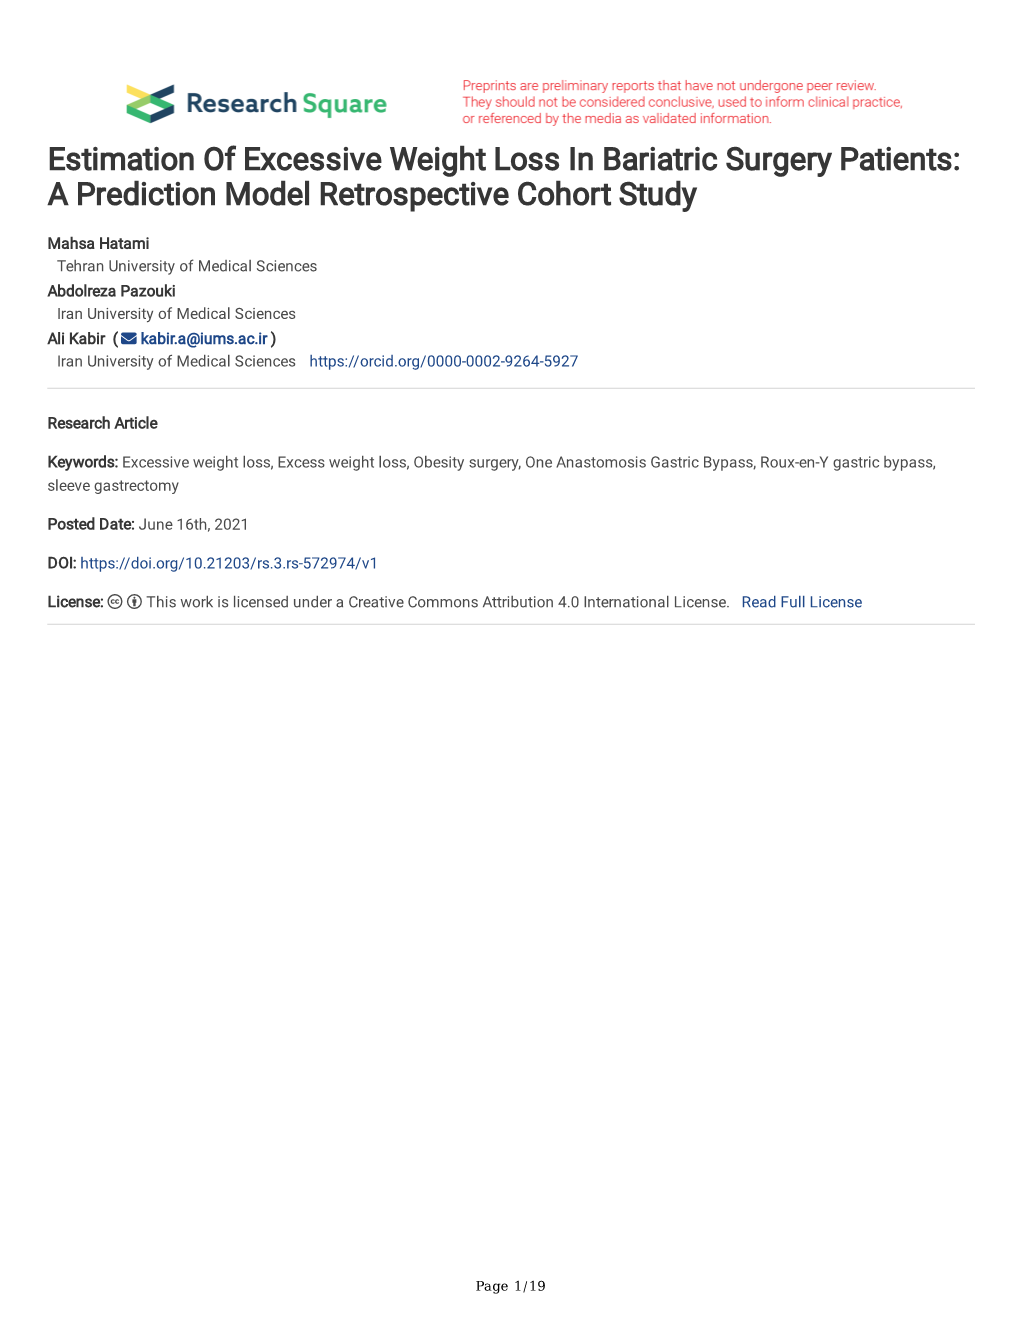 Estimation of Excessive Weight Loss in Bariatric Surgery Patients: a Prediction Model Retrospective Cohort Study